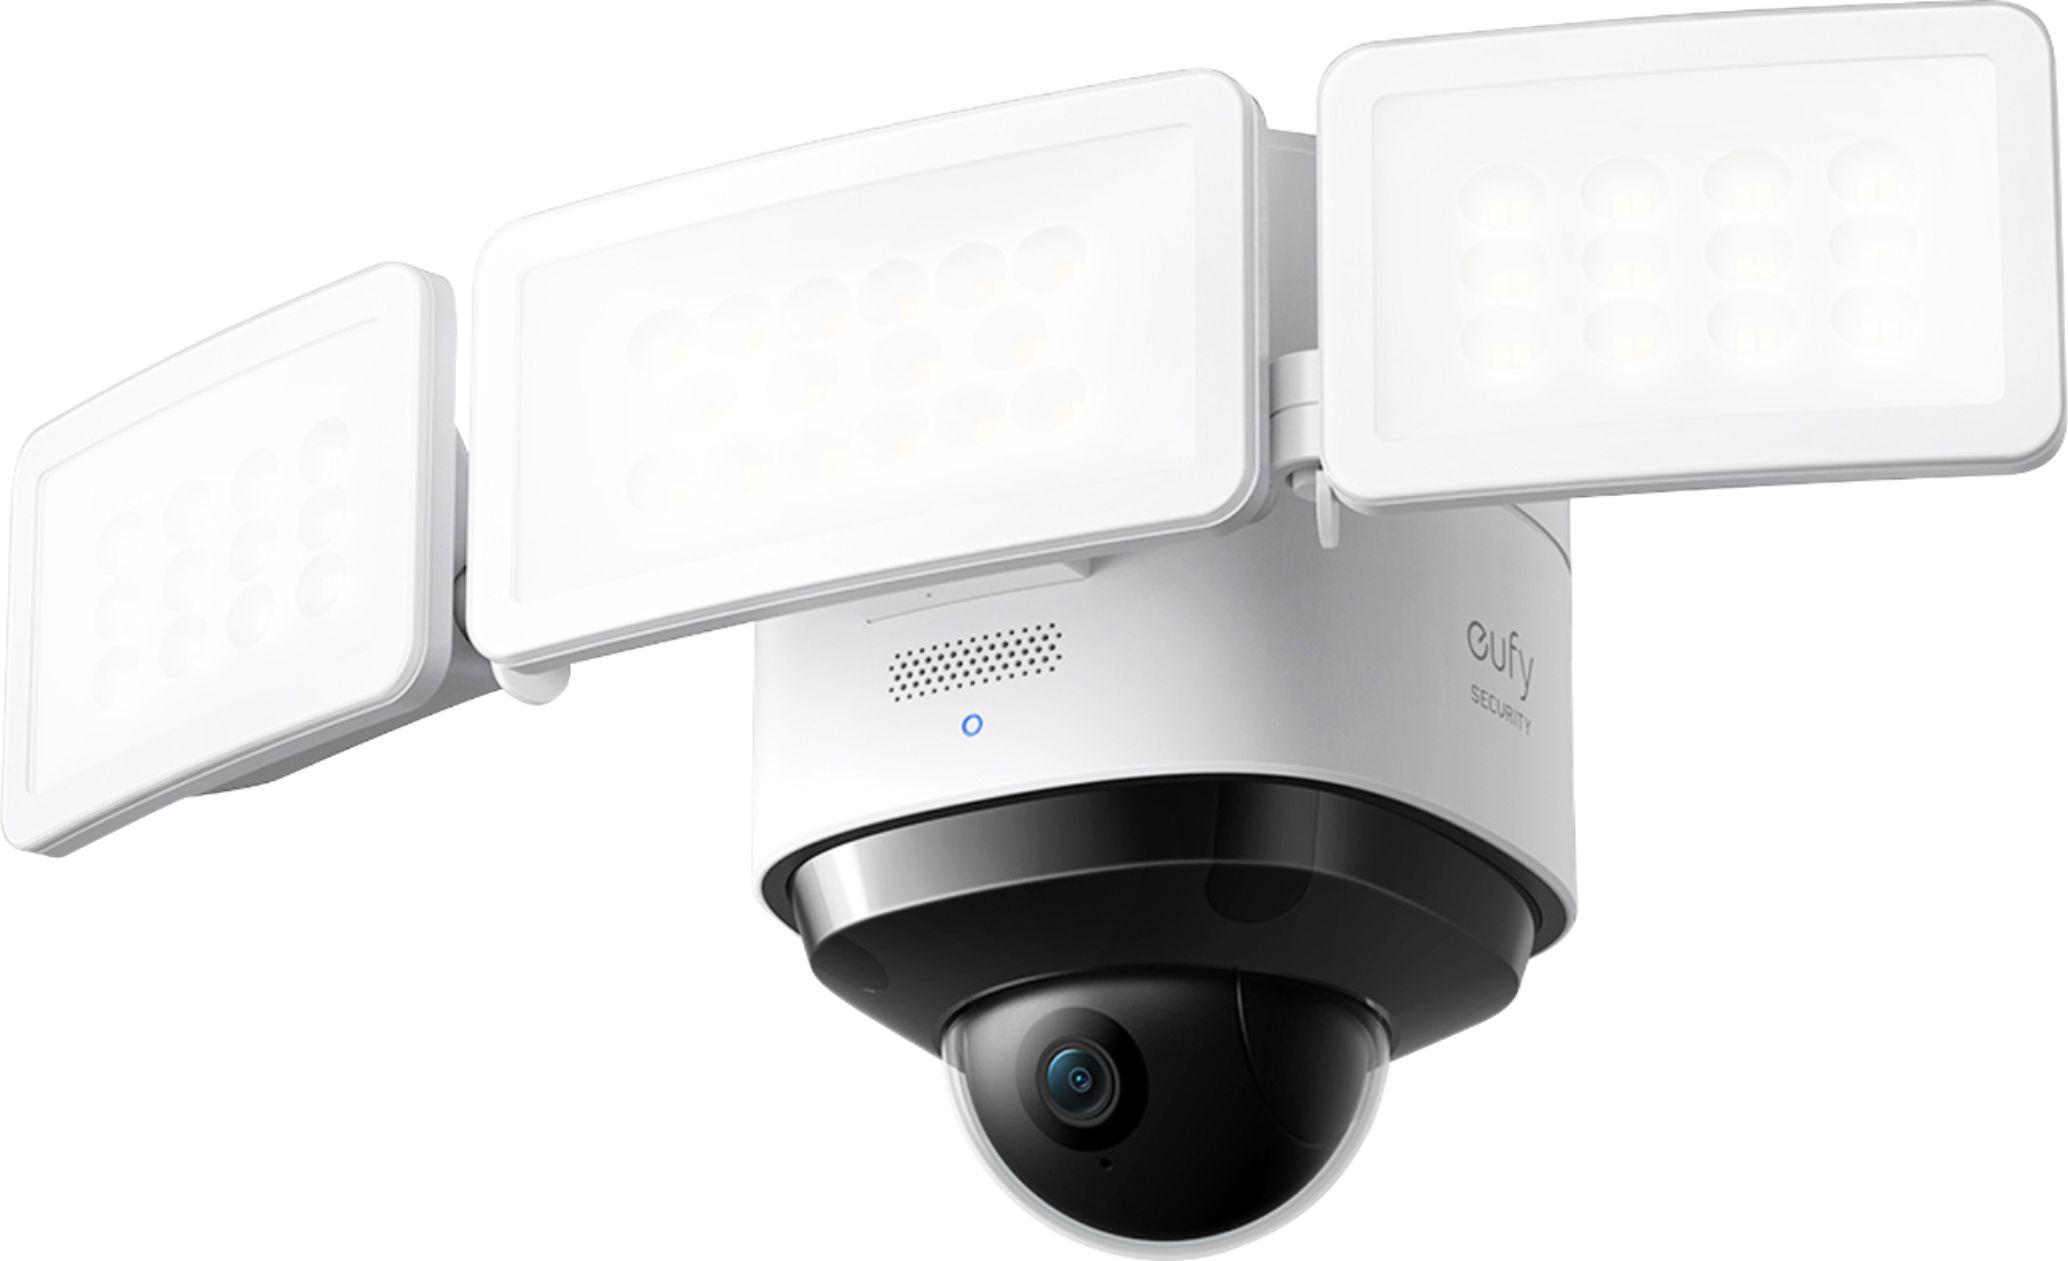 eufy Security Floodlight Cam 2 Pro Outdoor Wired 2K Full HD Surveillance Camera T8423J22 - Best Buy $249.99